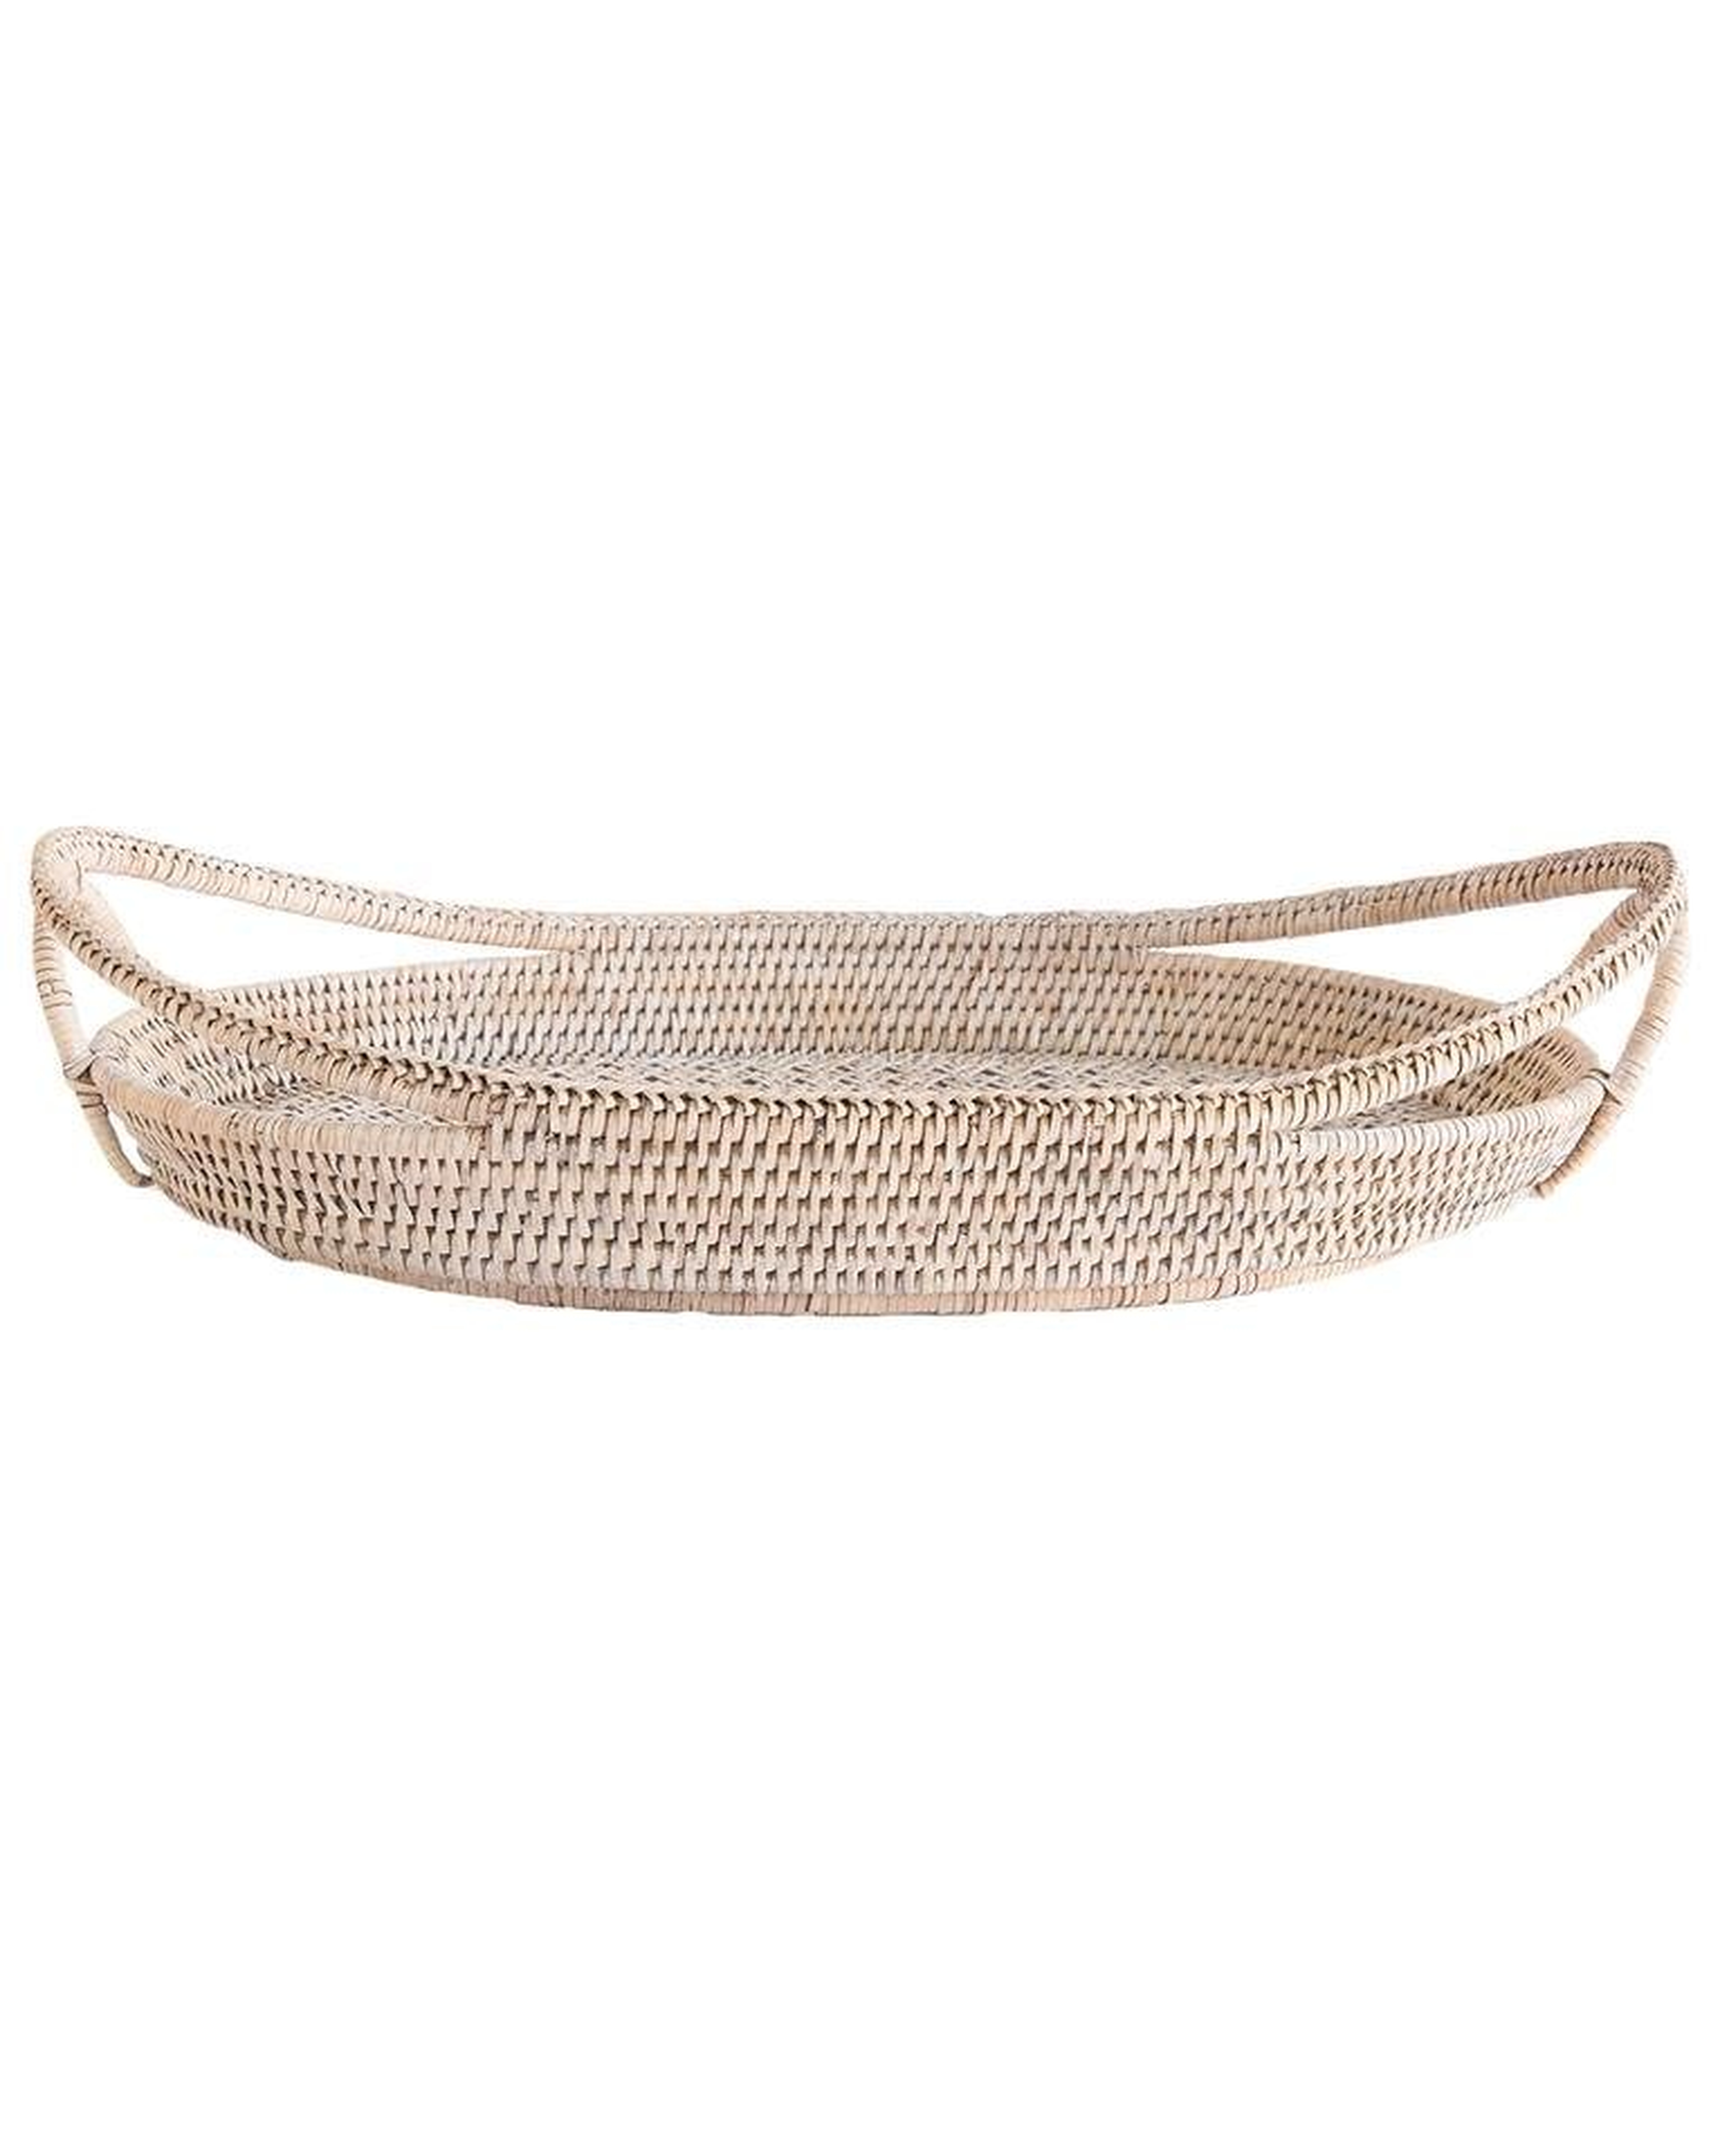 LACE WOVEN RATTAN TRAY - McGee & Co.